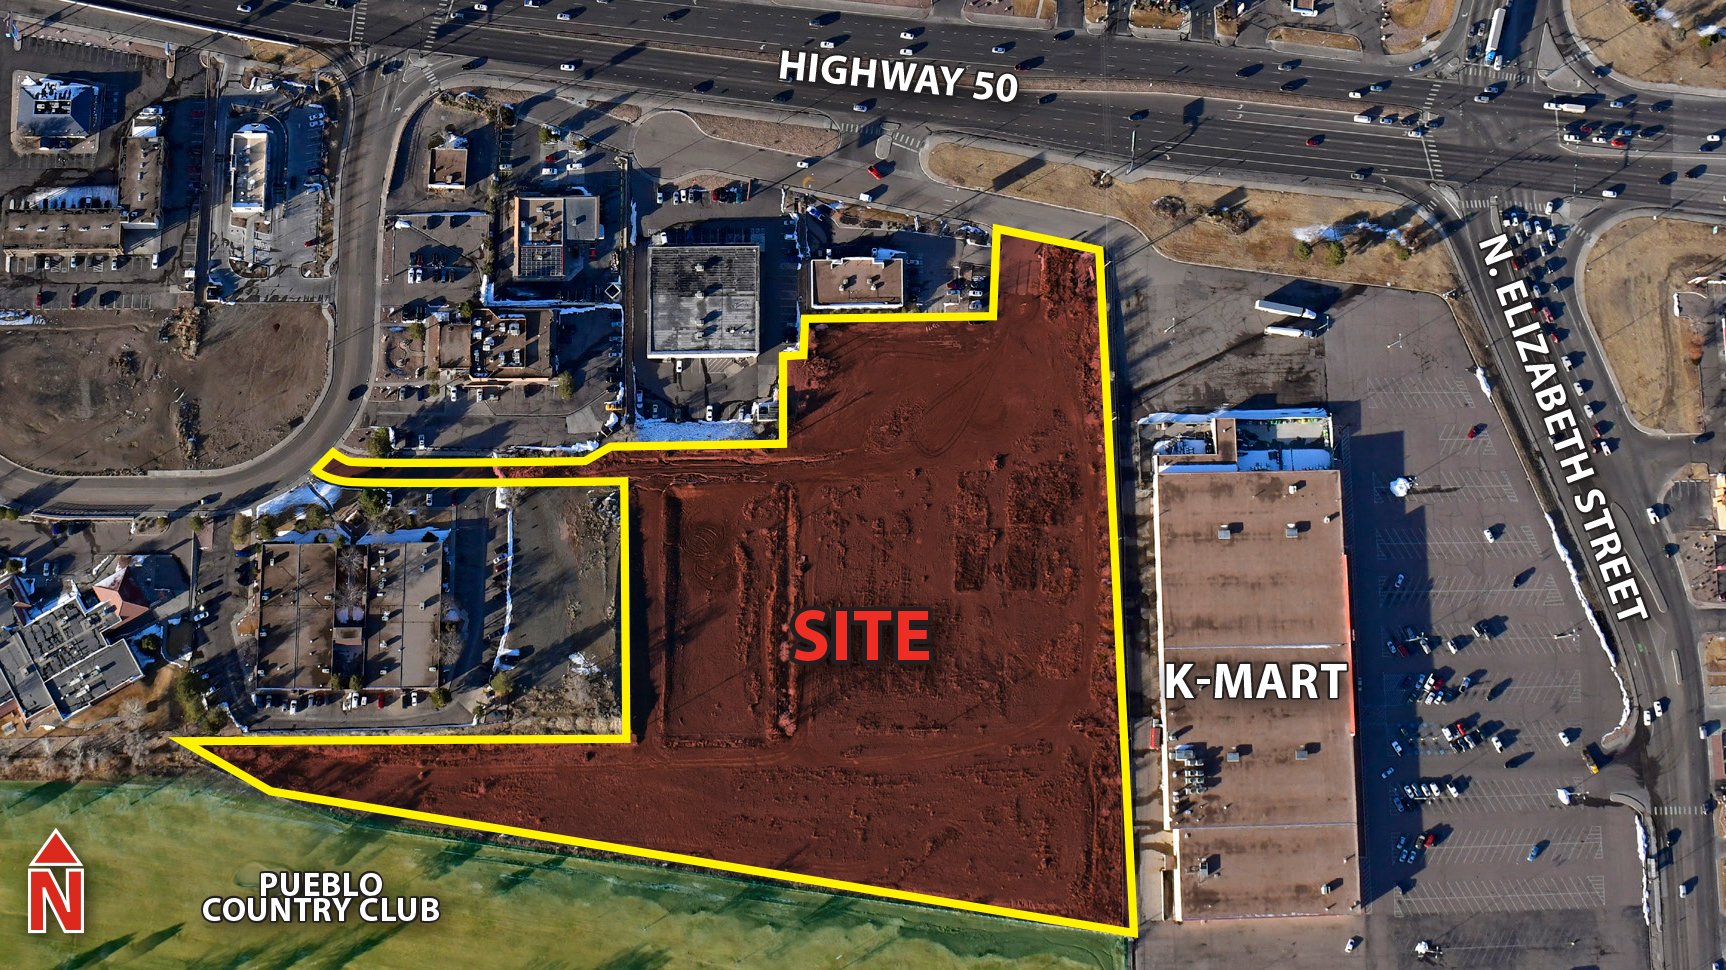 Avison Young brokers sale of 9.12-acre site in Pueblo, CO; Developer to build mixed-use project on vacant land by 2023